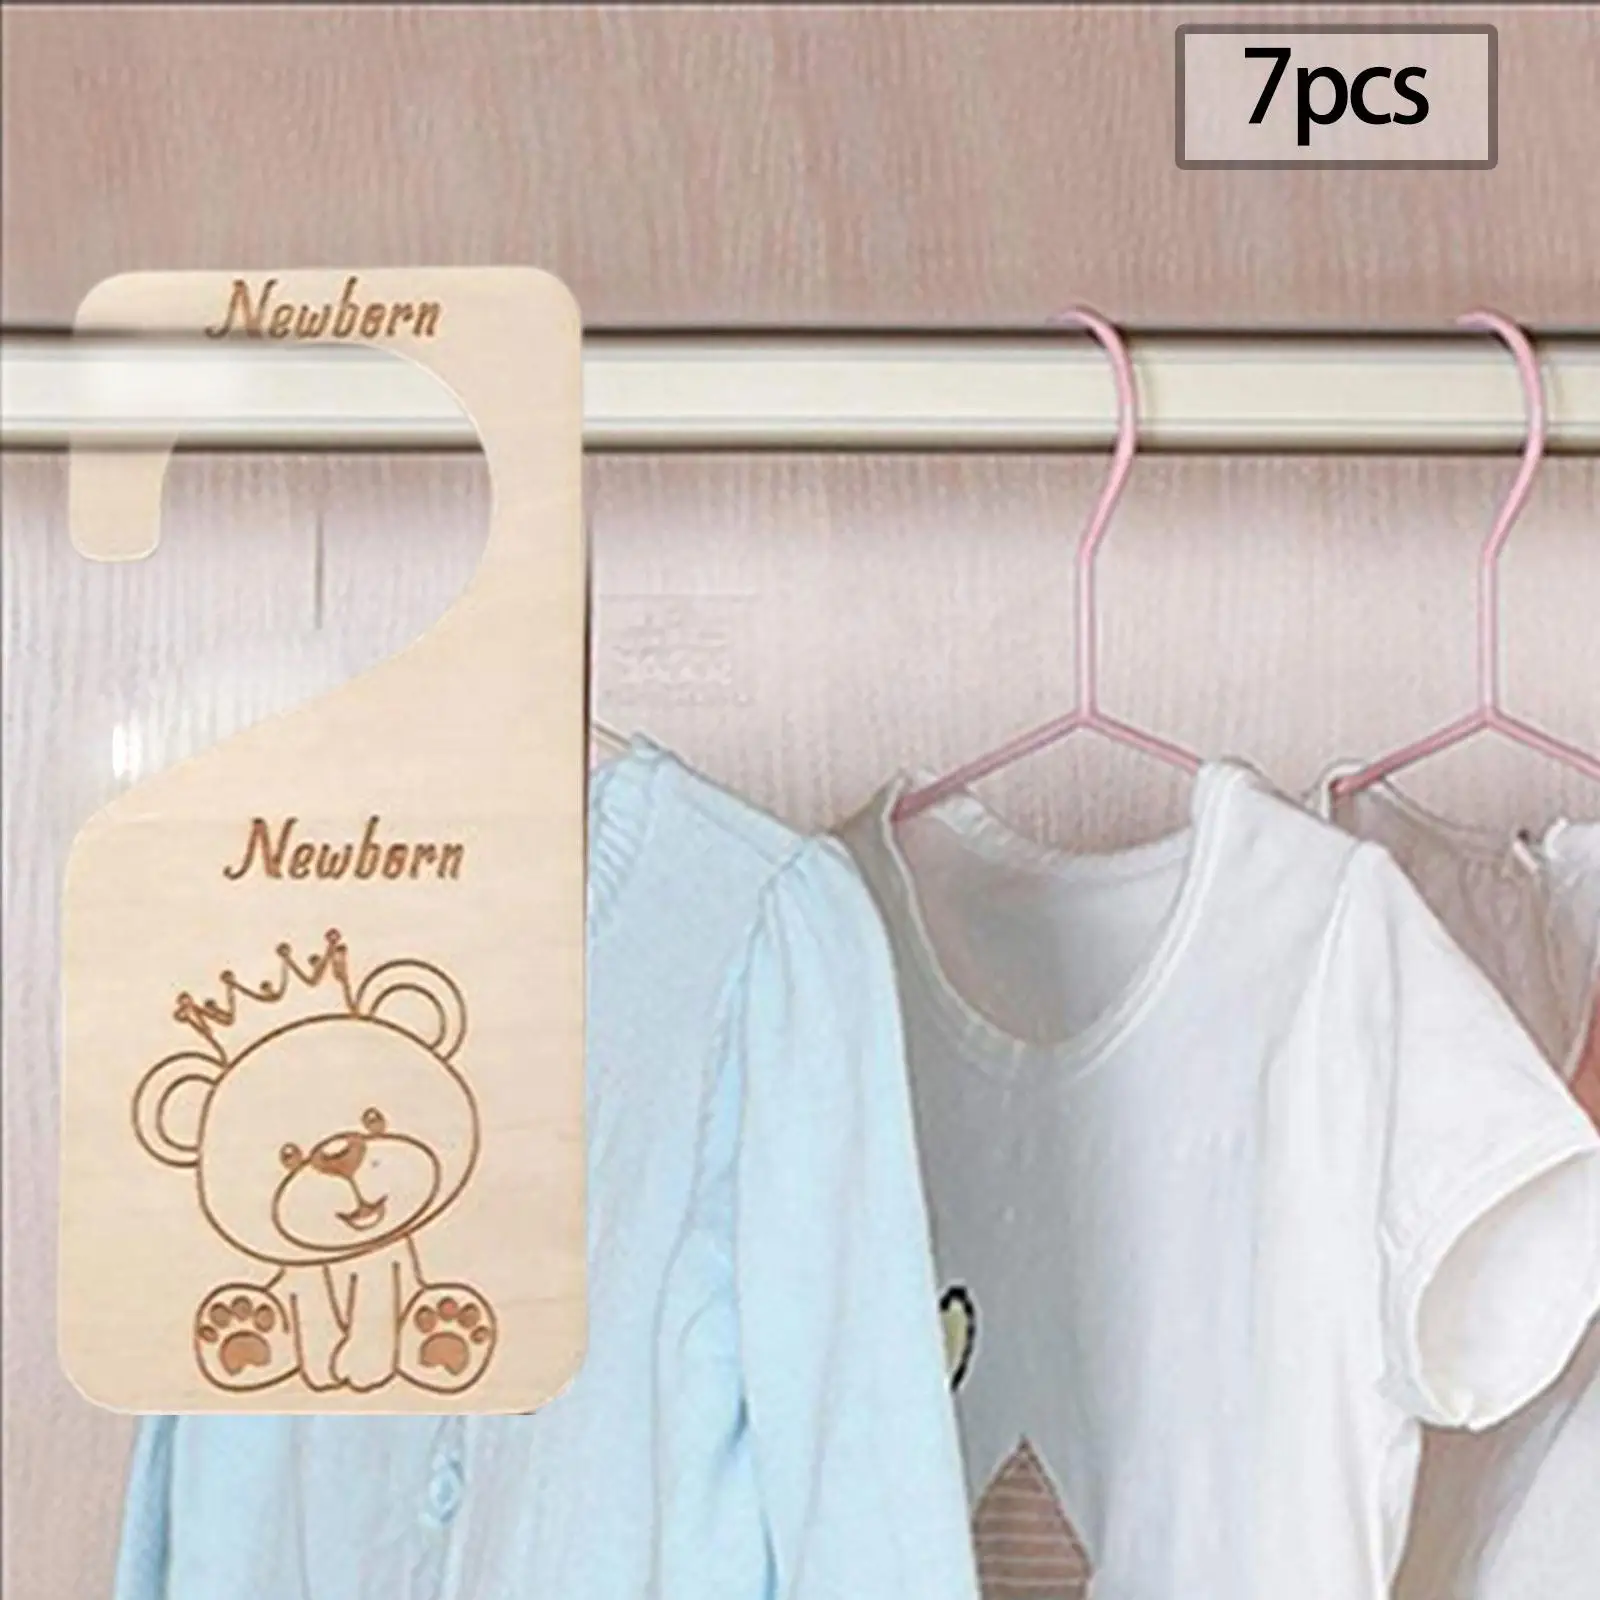 7 Pieces Newborn Baby Toddler Clothes Dividers Organizer Hanging Clothes Dividers for Bedroom Wardrobe Closet New Mom Gift